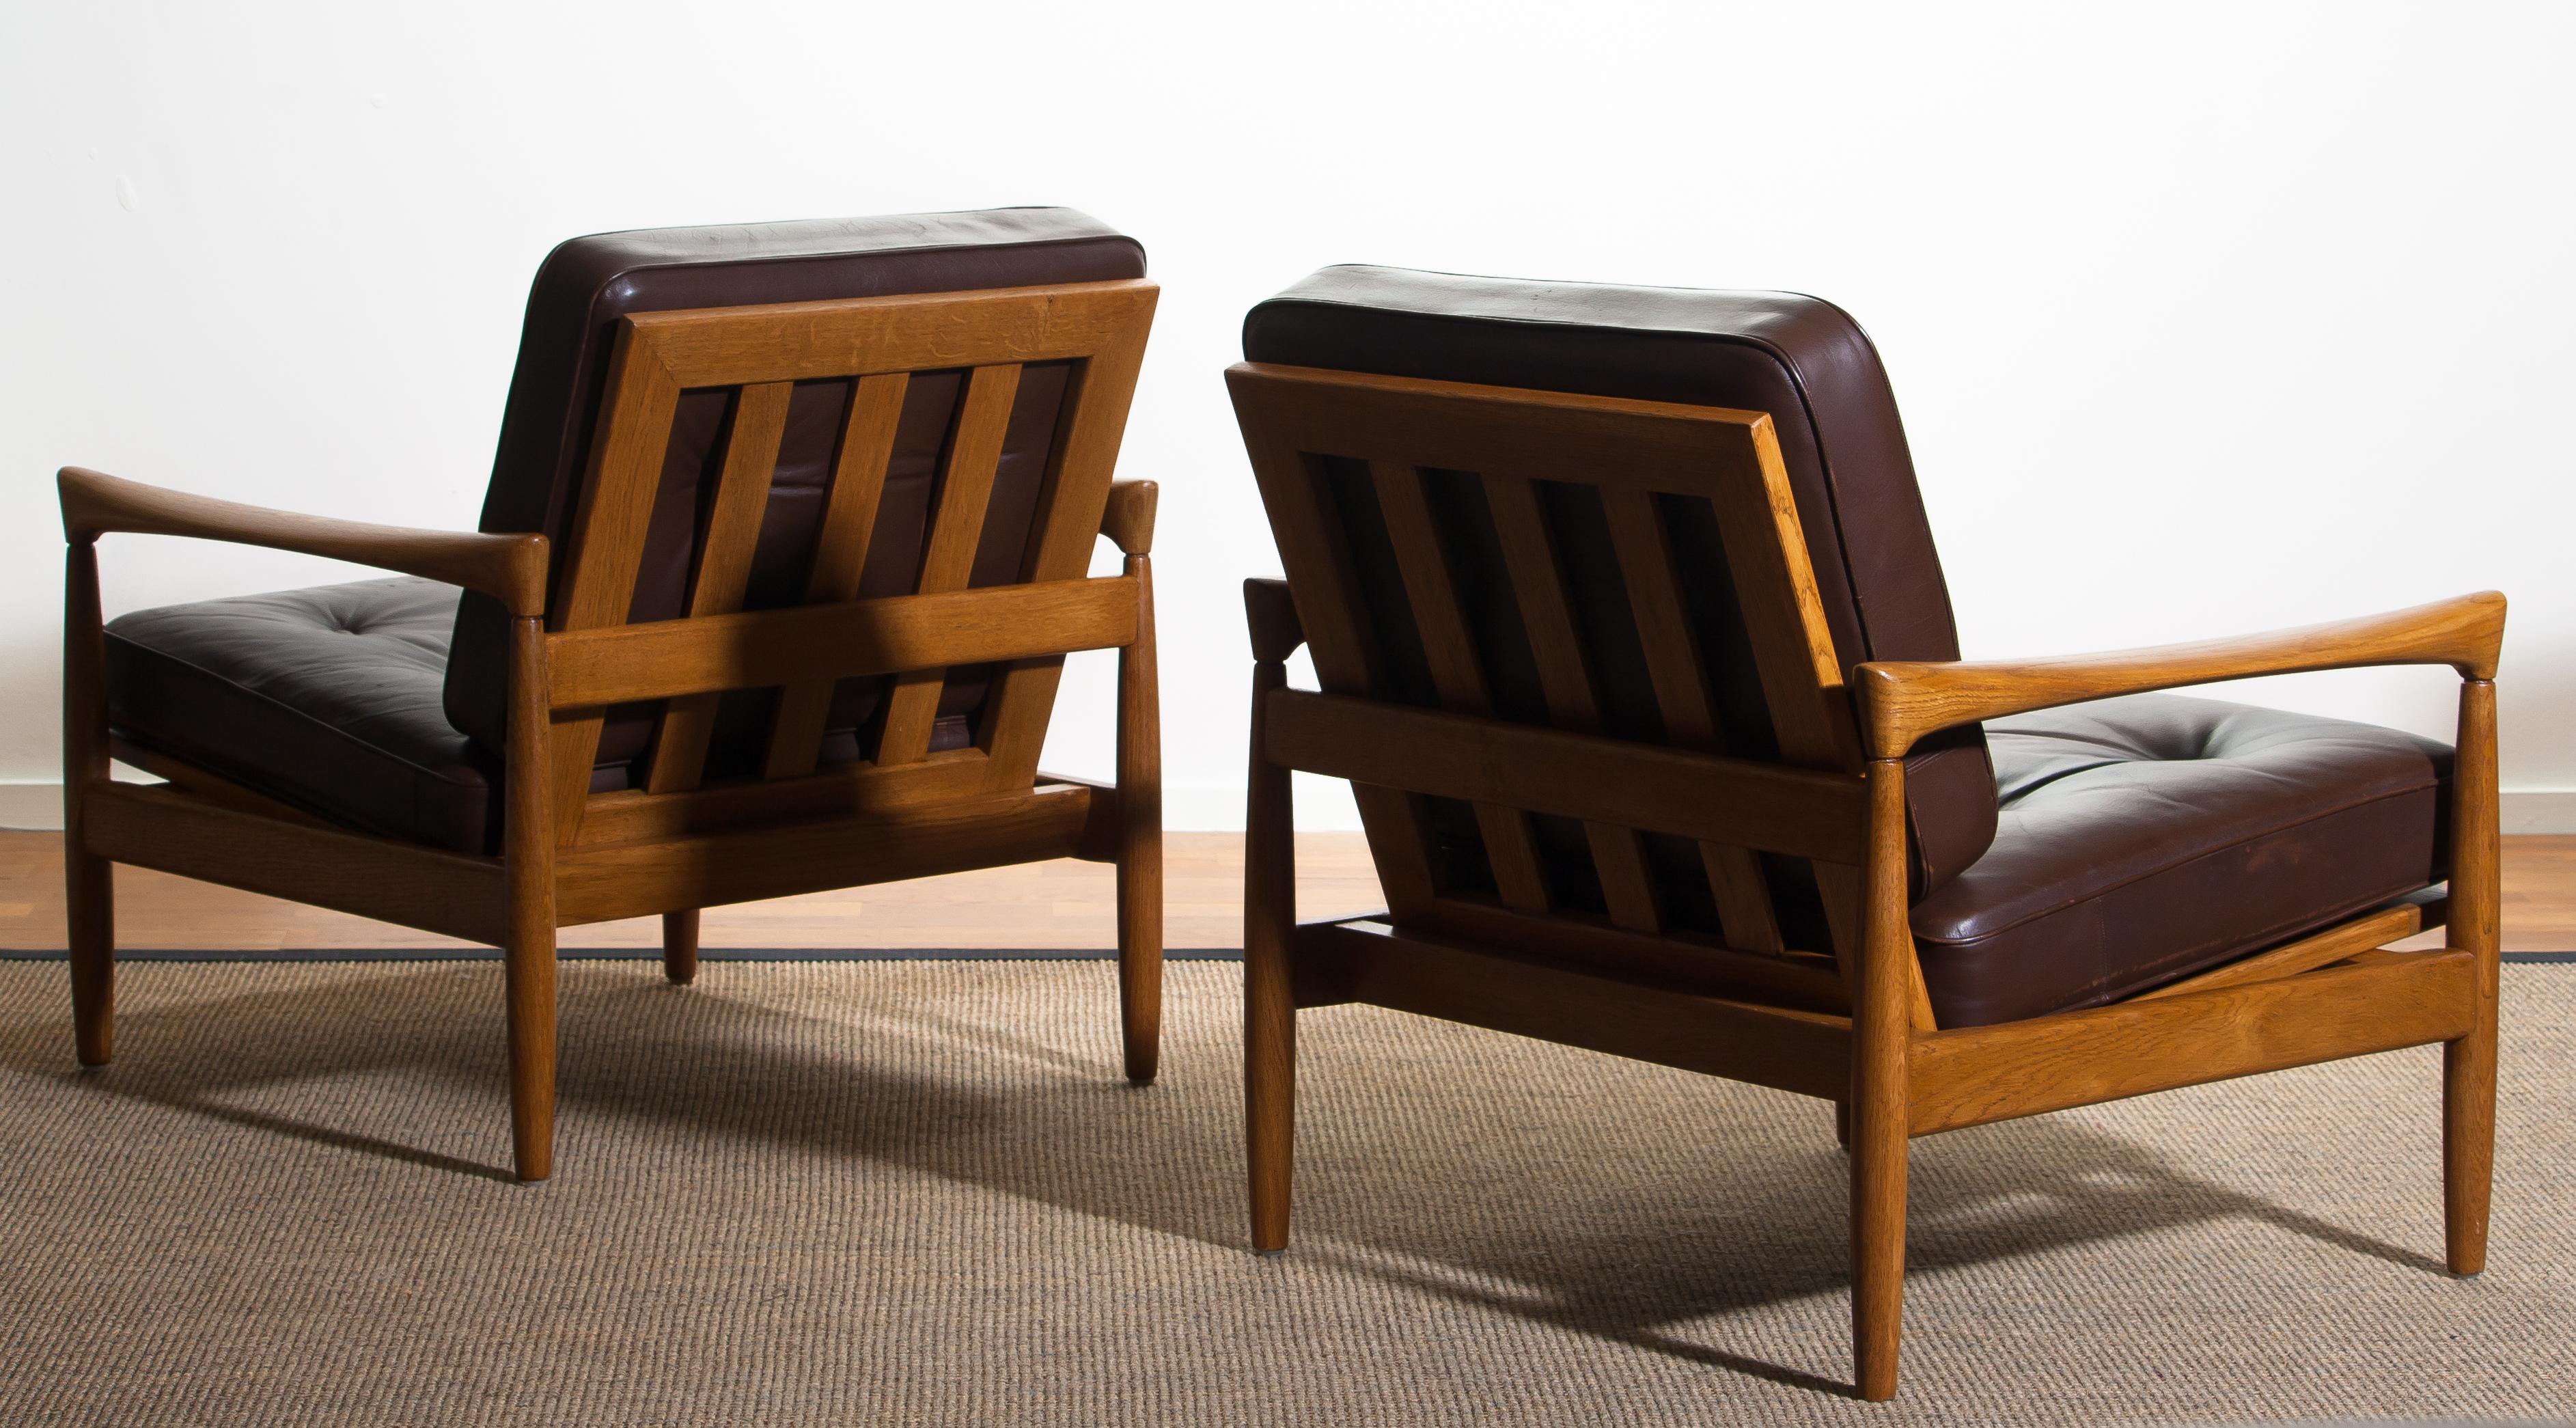 1960s, Set of Two Oak and Brown Leather Easy or Lounge Chairs by Erik Wörtz 2